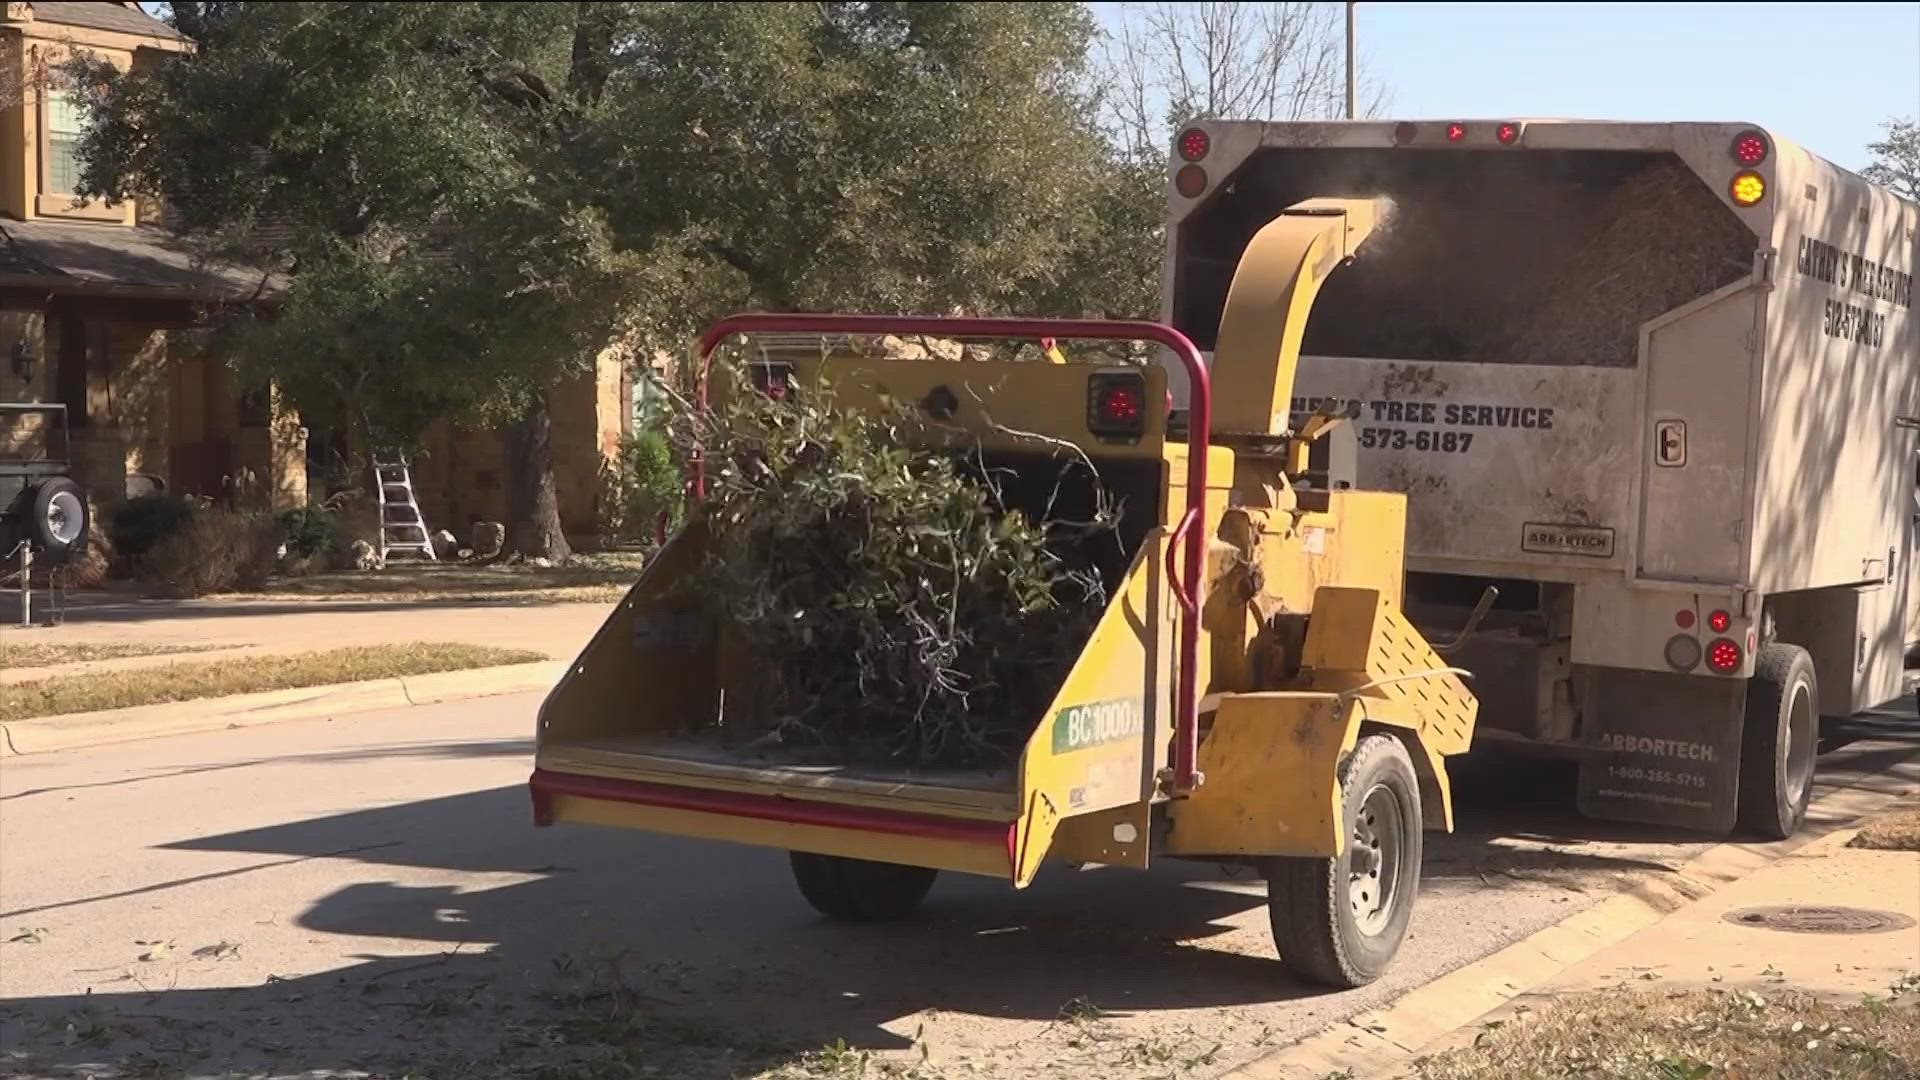 Cleanup efforts for tree debris are ramping up all around Central Texas.